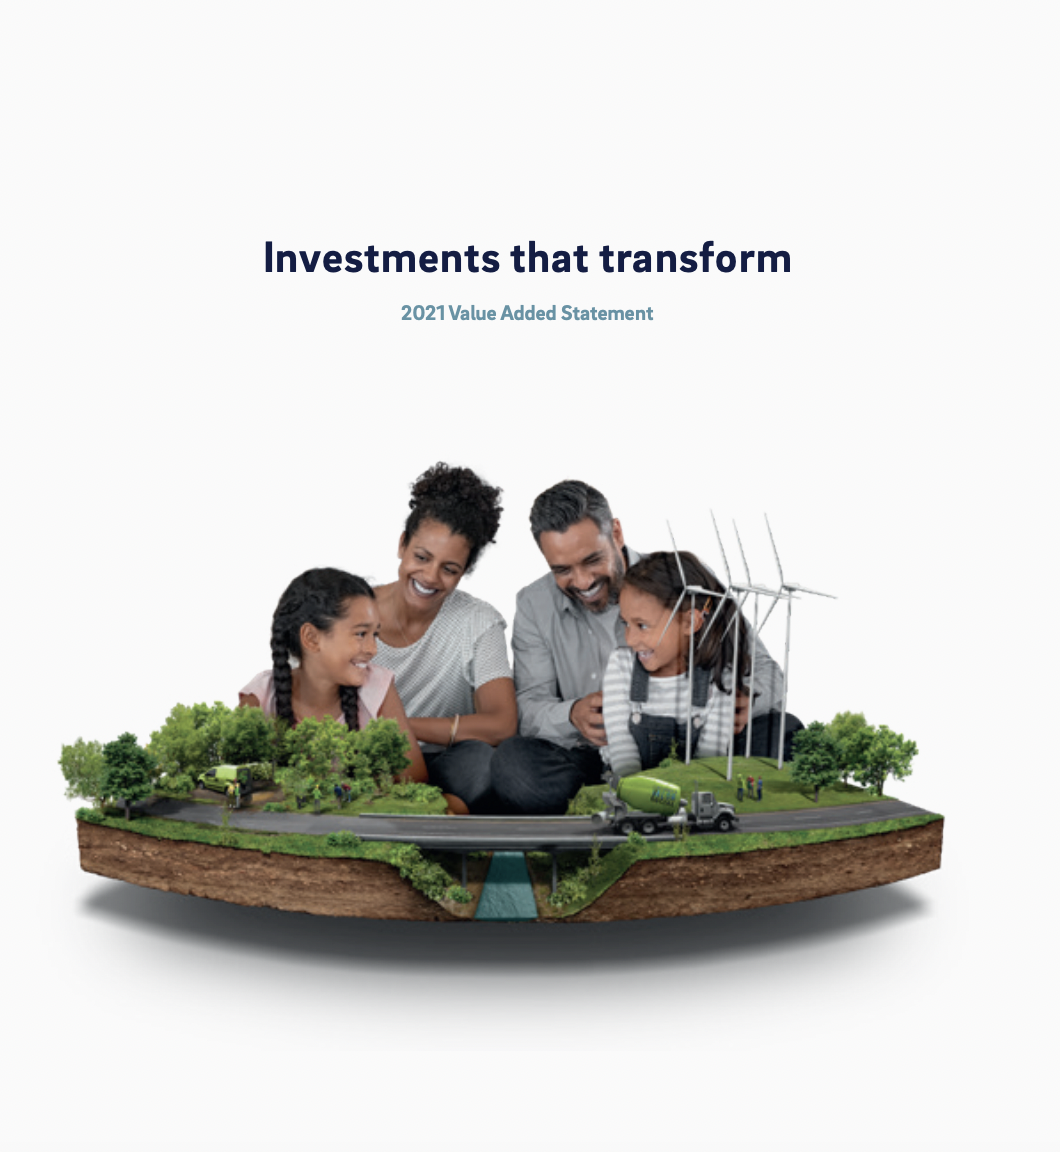 Investments that transform